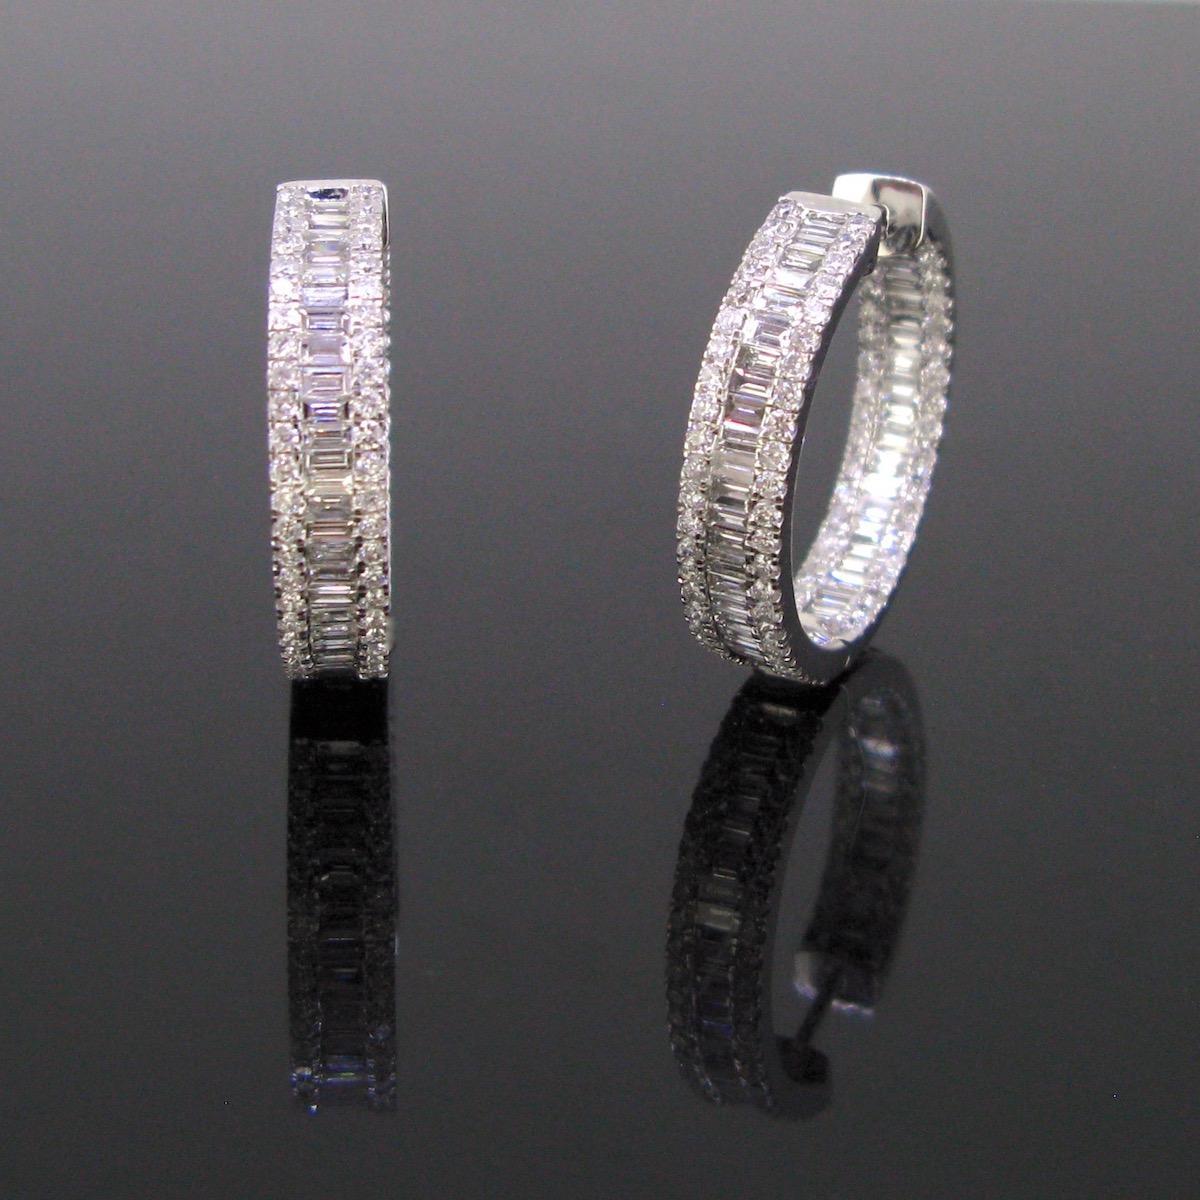 Weight:	10.30gr


Metal:	18kt white Gold


Hallmarks:	UK


Condition:	Excellent


Stones:	2 x 123 Diamonds
•	Cut:	2 x 41 baguette / 2 x 82 Brilliant
•	Total Carat Weight:	3.57ct 
•	Colour:	G/H
•	Clarity:	VS


Comments: 	This pair of earrings is made